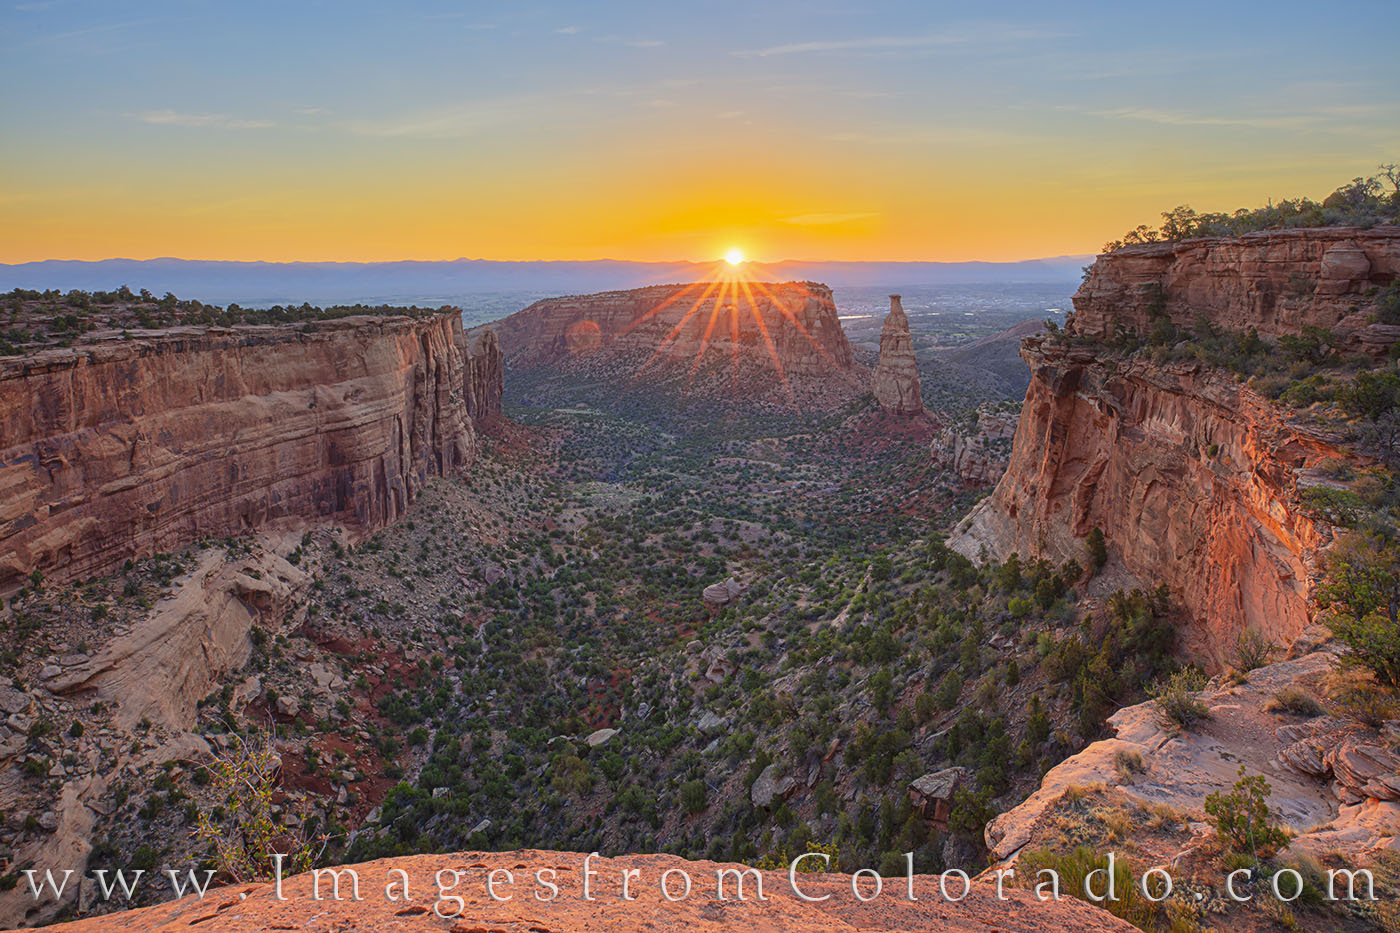 The light of sunrise spreads through the canyon in this morning photograph showing Independence Monument in Colorado National...